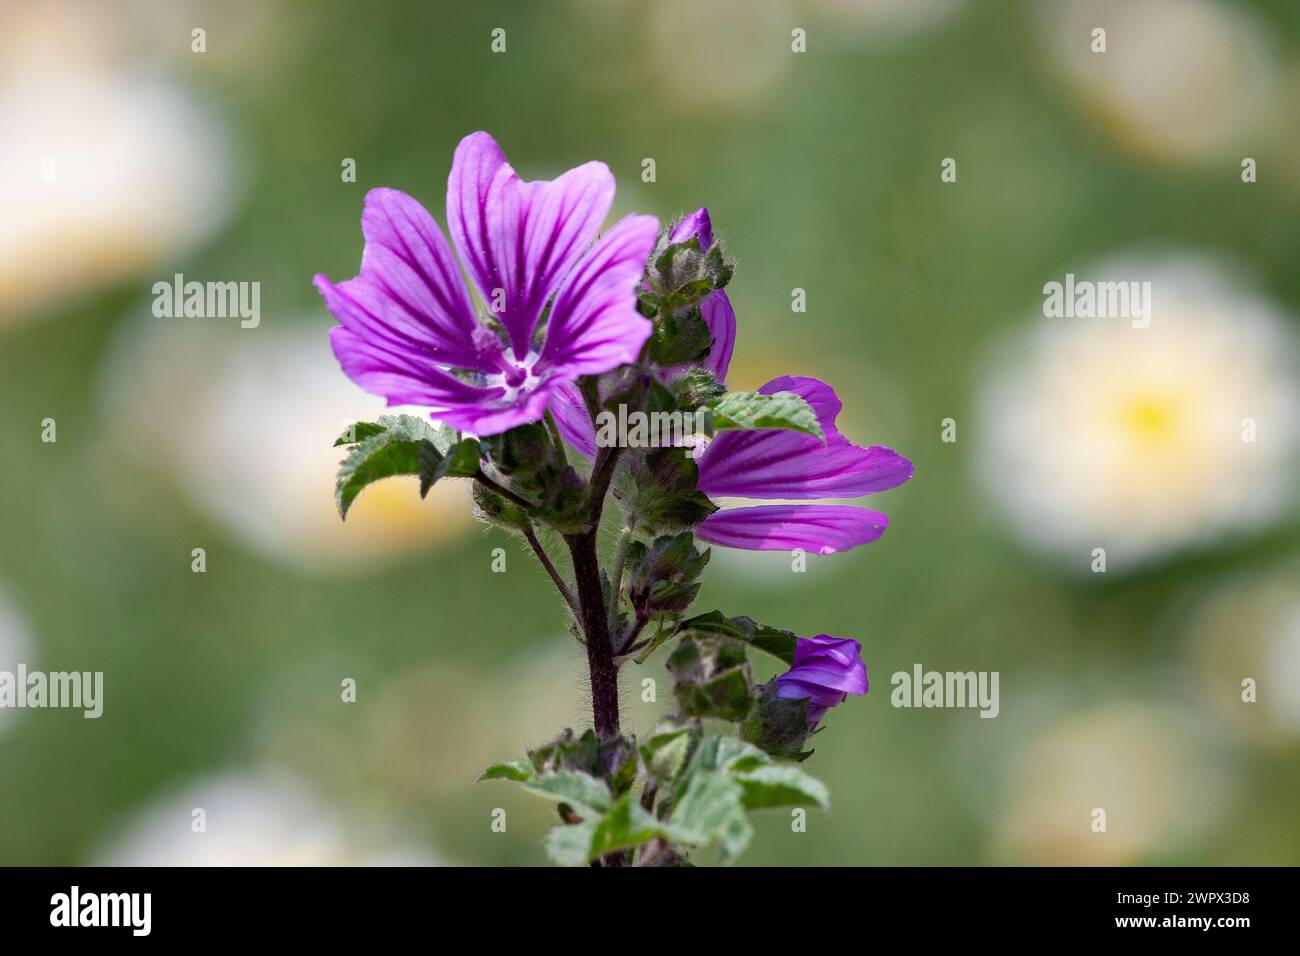 Violet 'Dwarf Mallow' flower (or Buttonweed, Cheeseplant, Cheeseweed, Common Mallow, Roundleaf Mallow). Its Latin name is Malva Sylvestris. Stock Photo